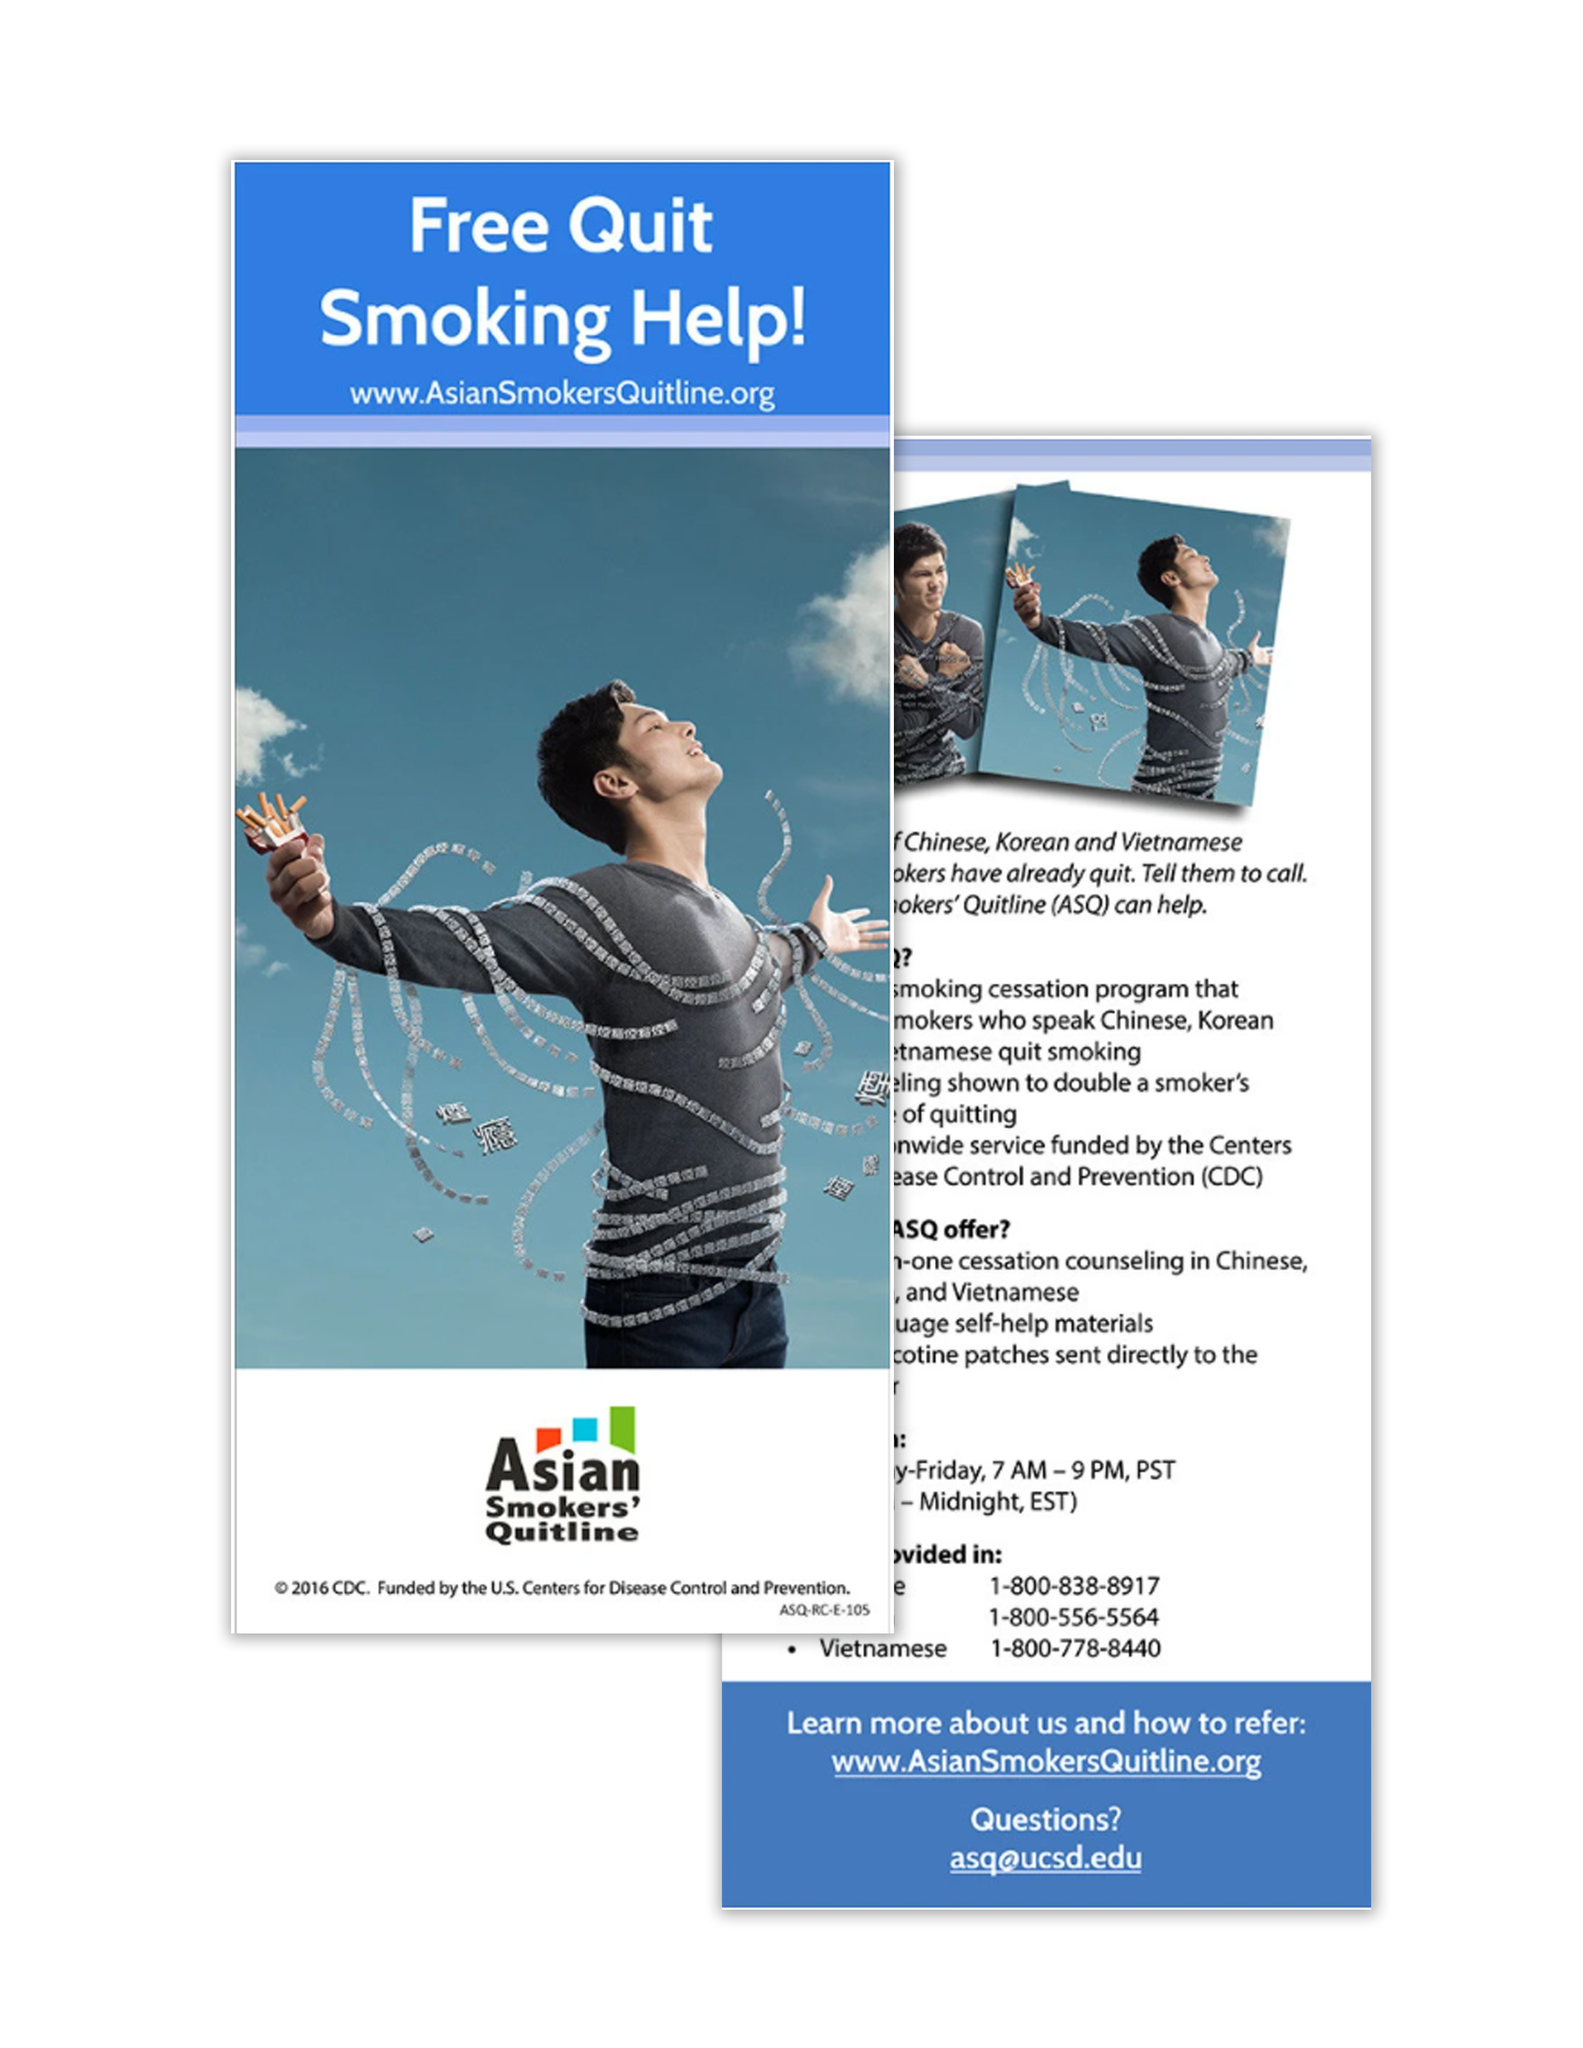 Free Help to Quit ASQ Rack Card (Printed)